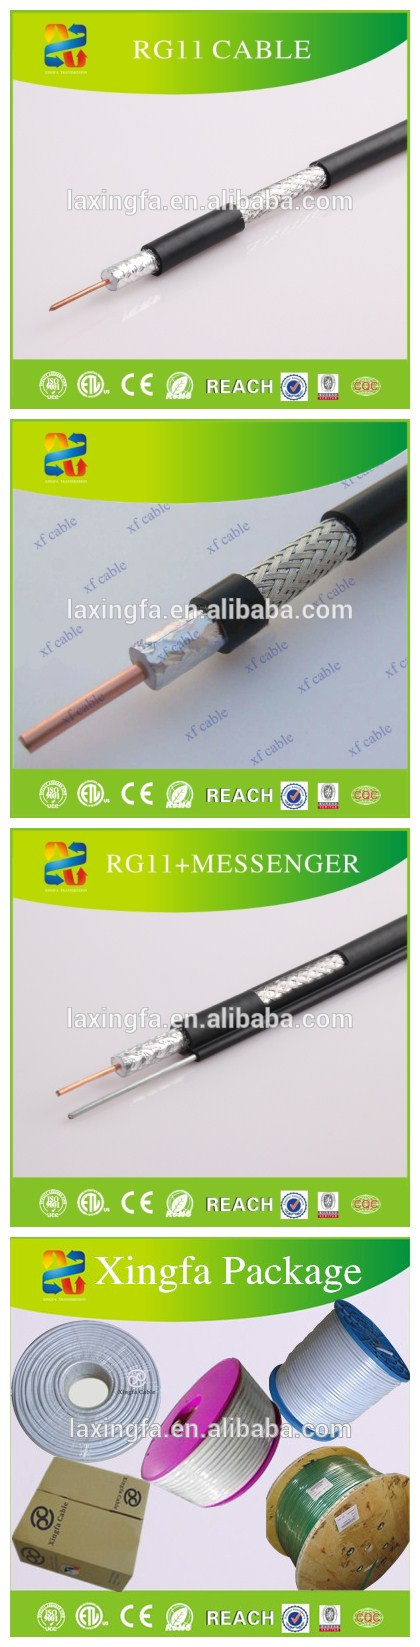 Rg11 Cable From Hangzhou Xingfa Cable Manufacturer